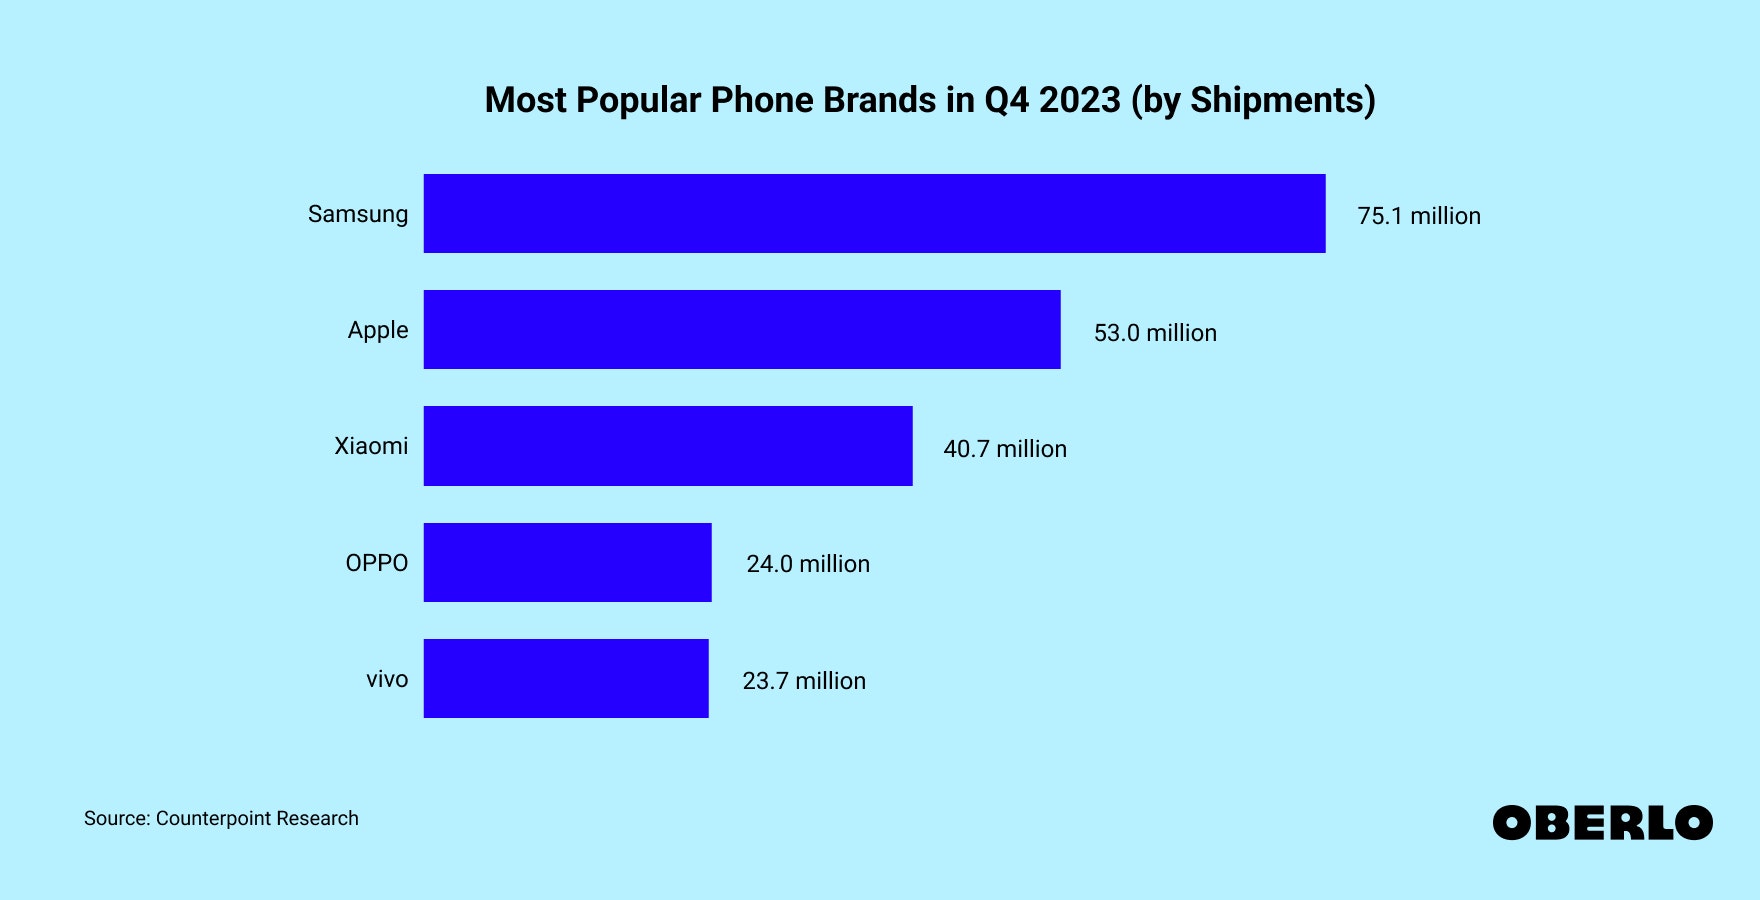 Chart showing: Most Popular Phone Brands in Q4 2023 by shipments